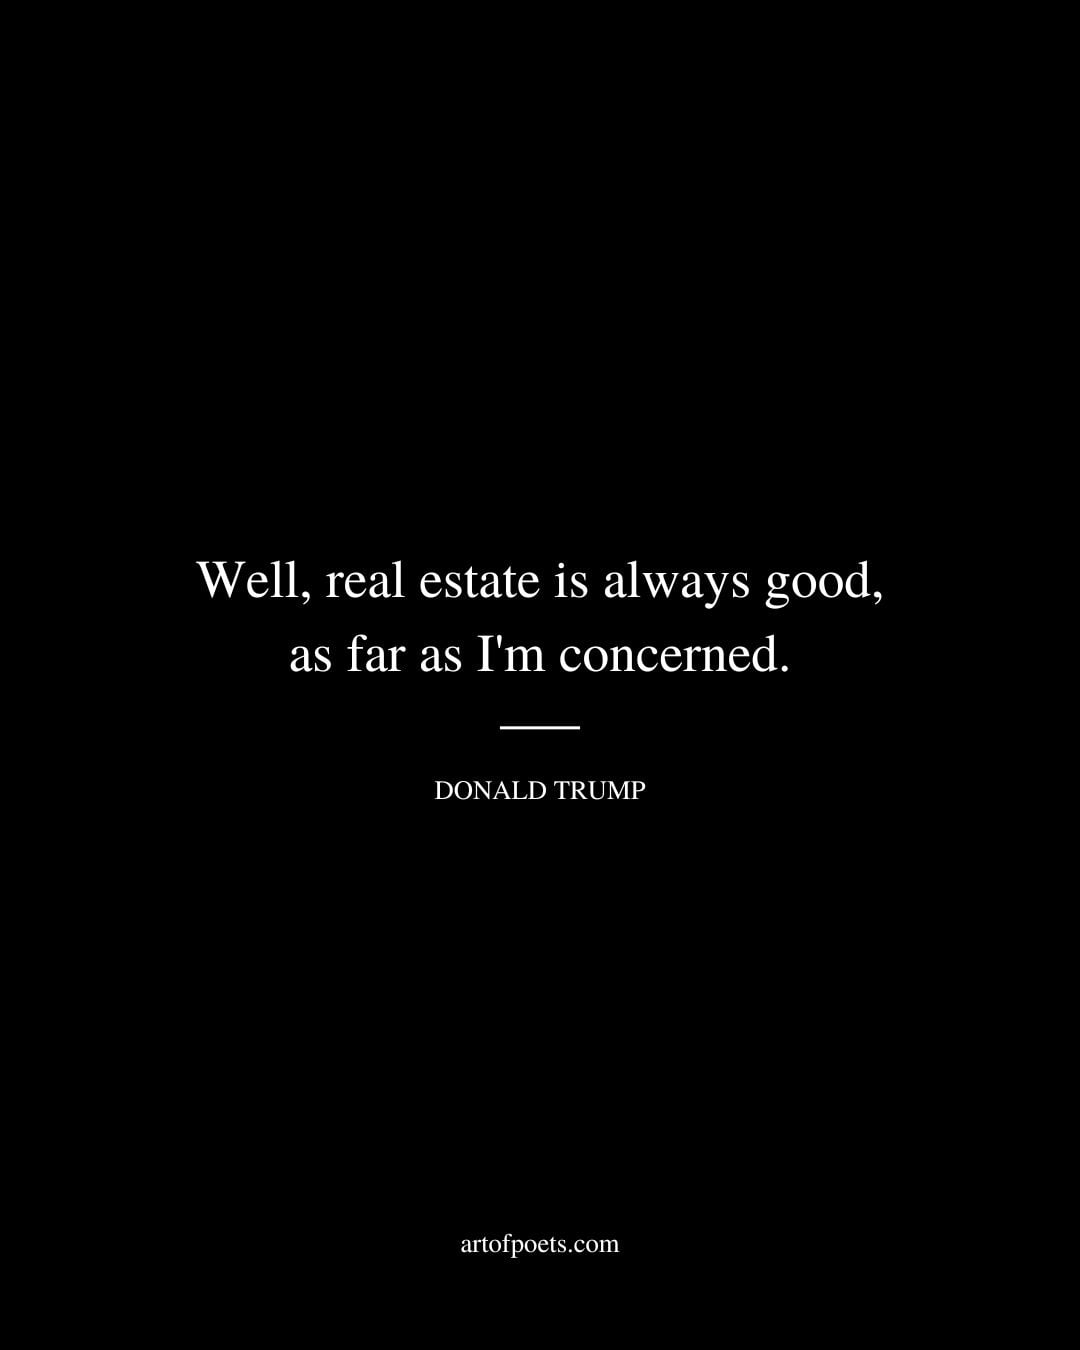 Well real estate is always good as far as Im concerned